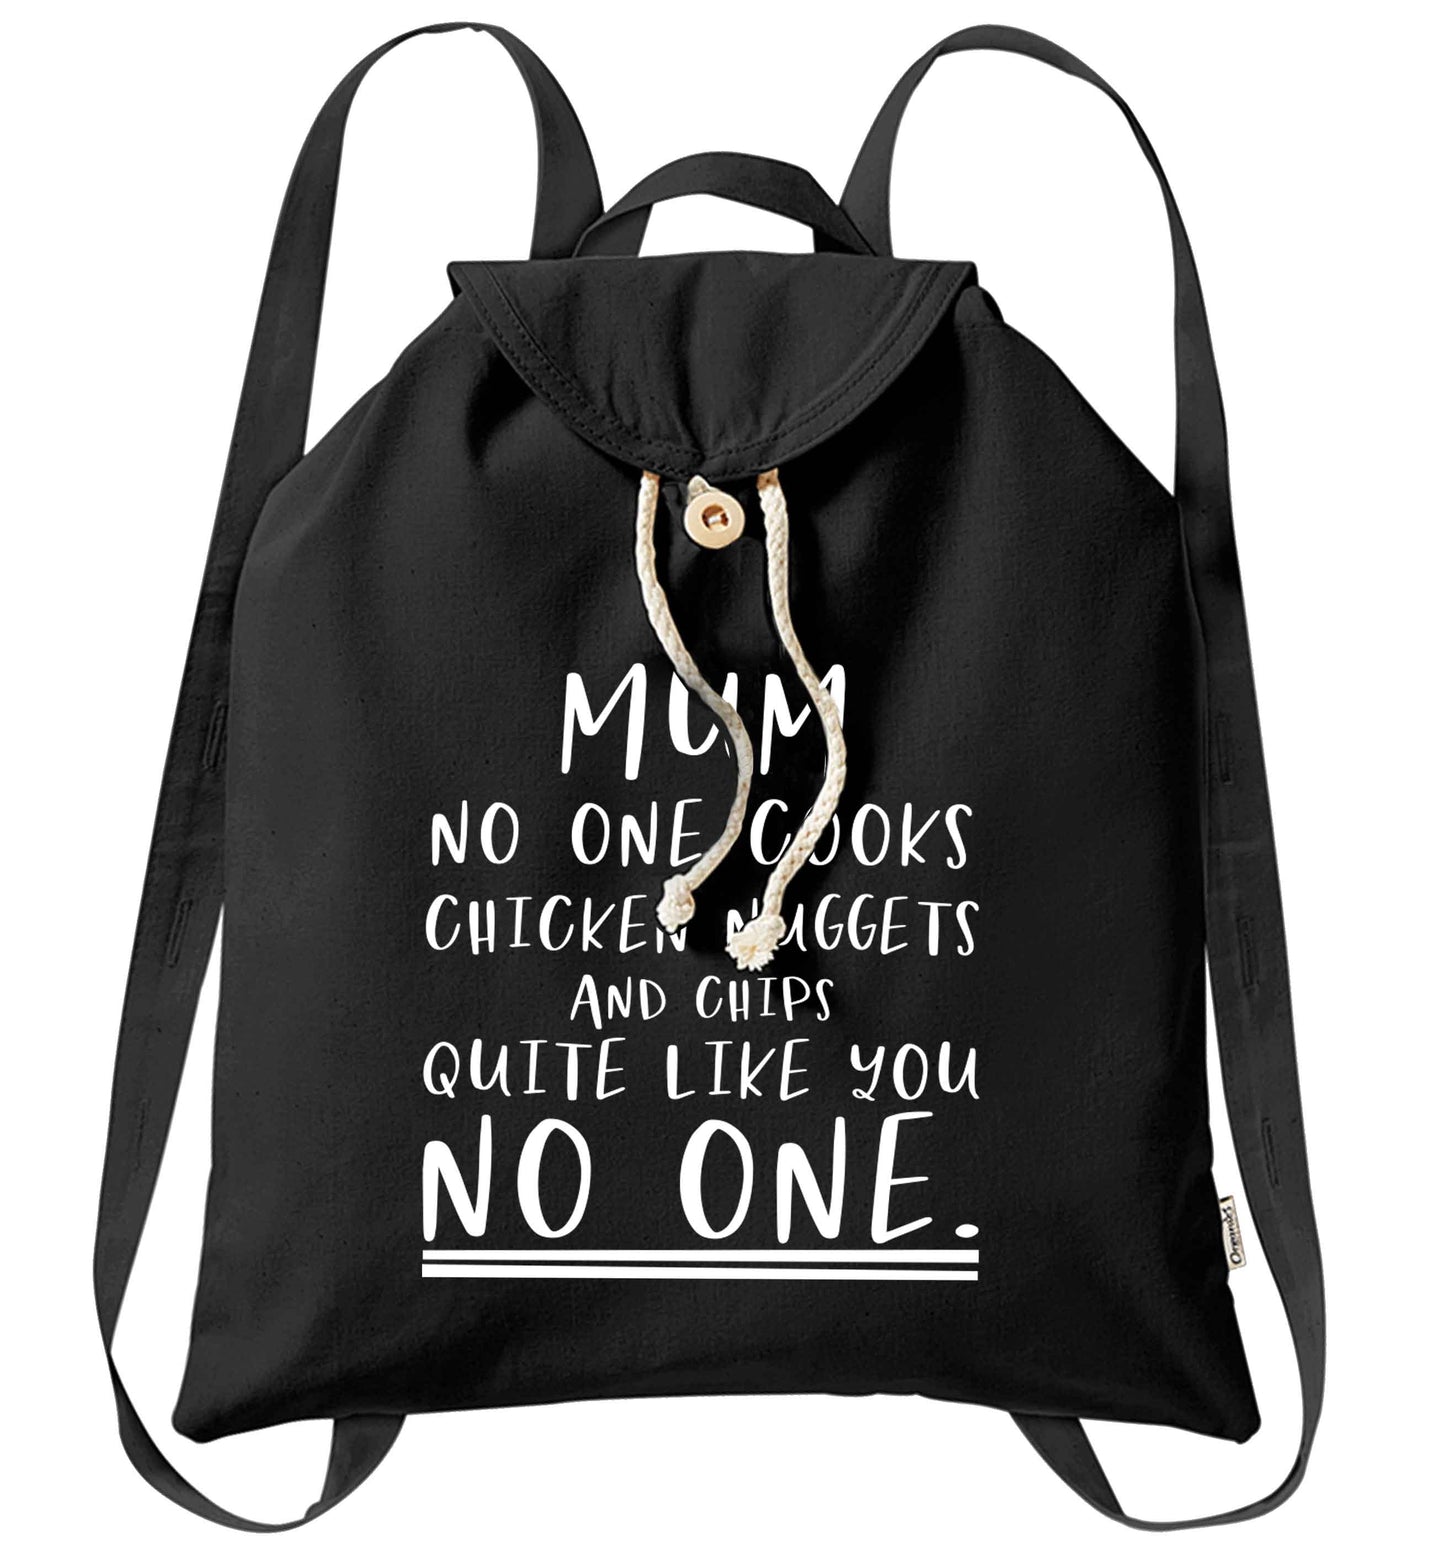 Super funny sassy gift for mother's day or birthday!  Mum no one cooks chicken nuggets and chips like you no one organic cotton backpack tote with wooden buttons in black